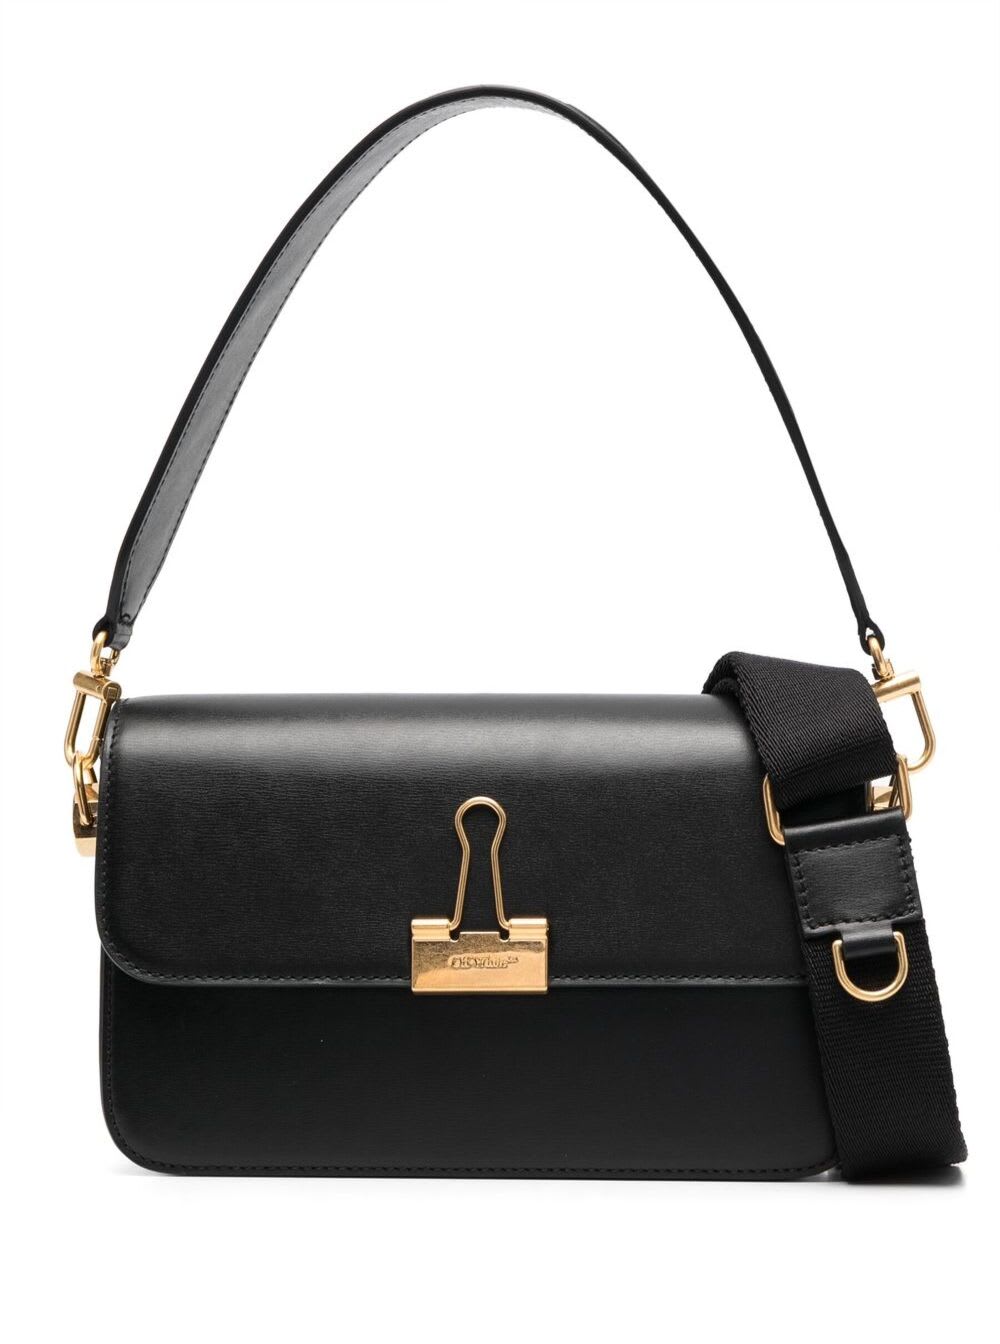 OFF-WHITE BINDER CLIP CROSSBODY BAG IN BLACK LEATHER WOMAN